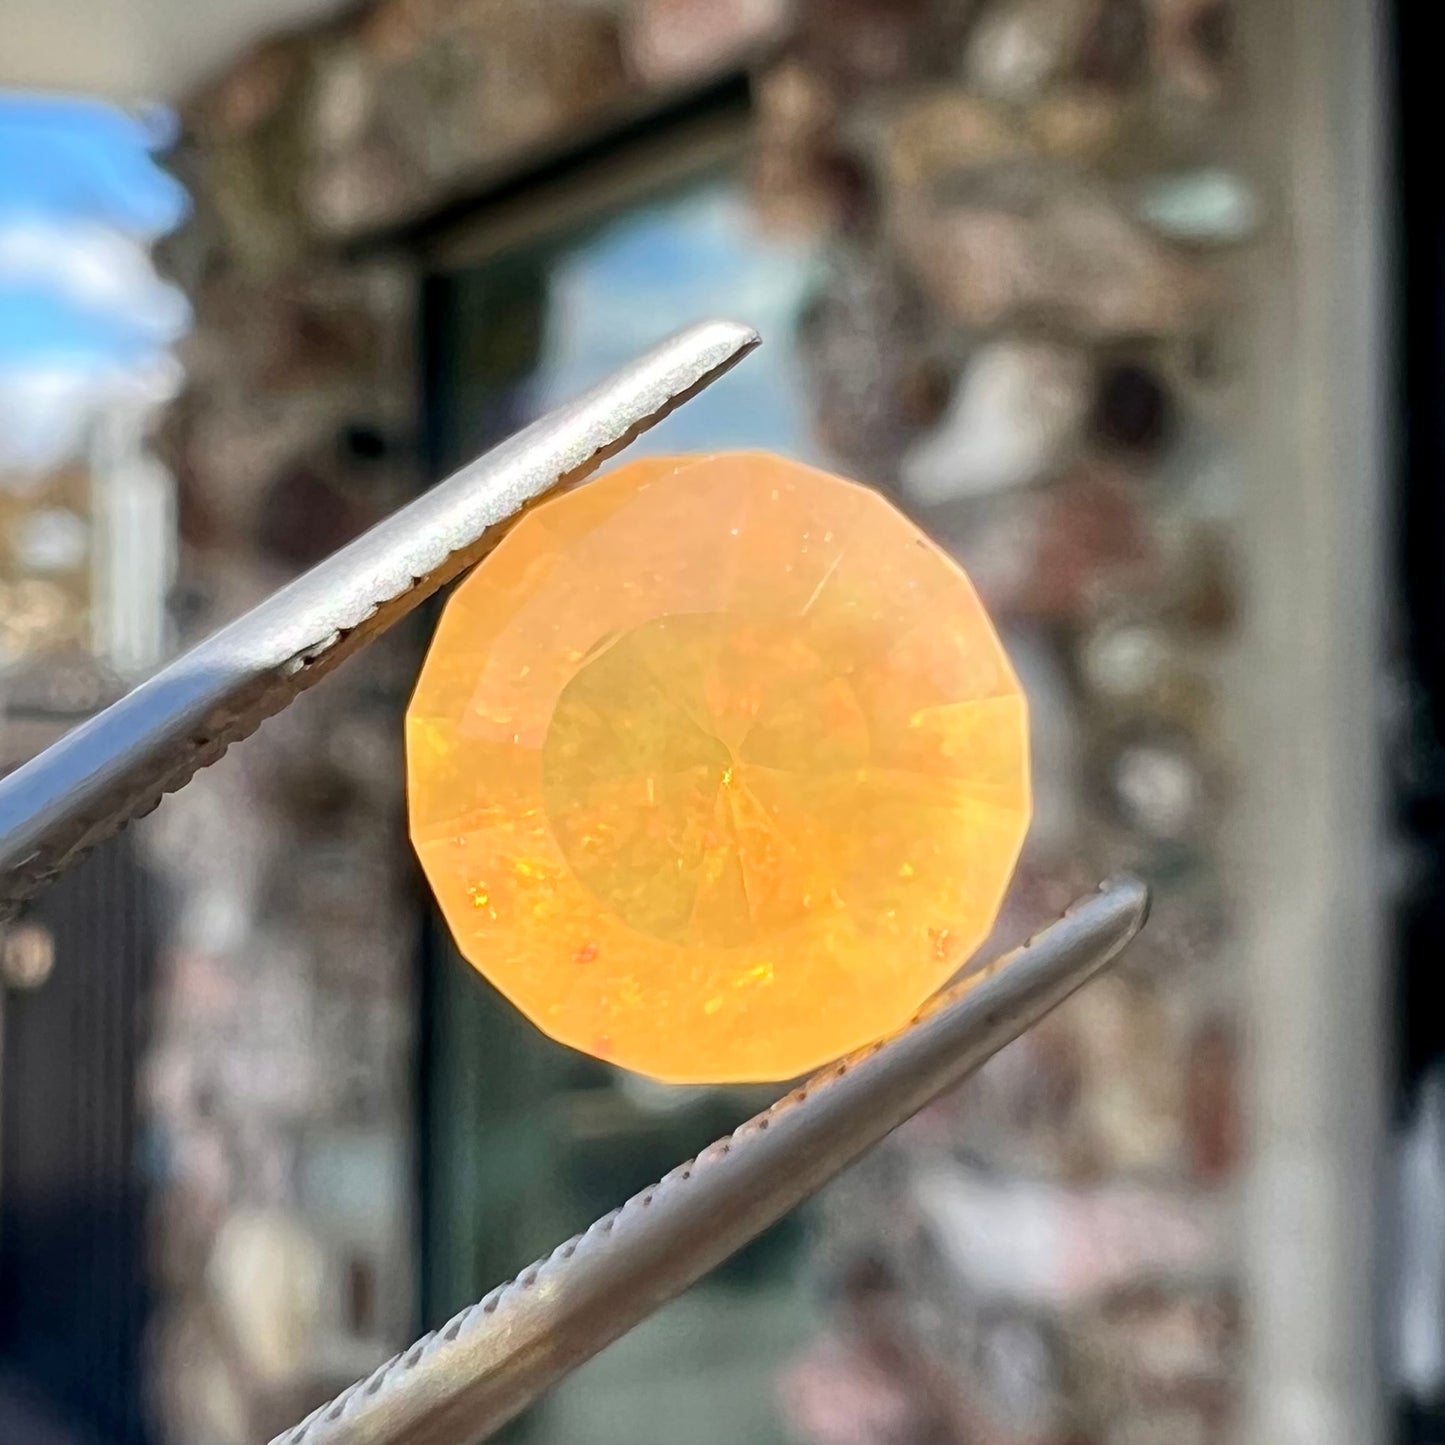 A loose, faceted round cut fire opal from Mexico.  The stone is yellow orange in body color.